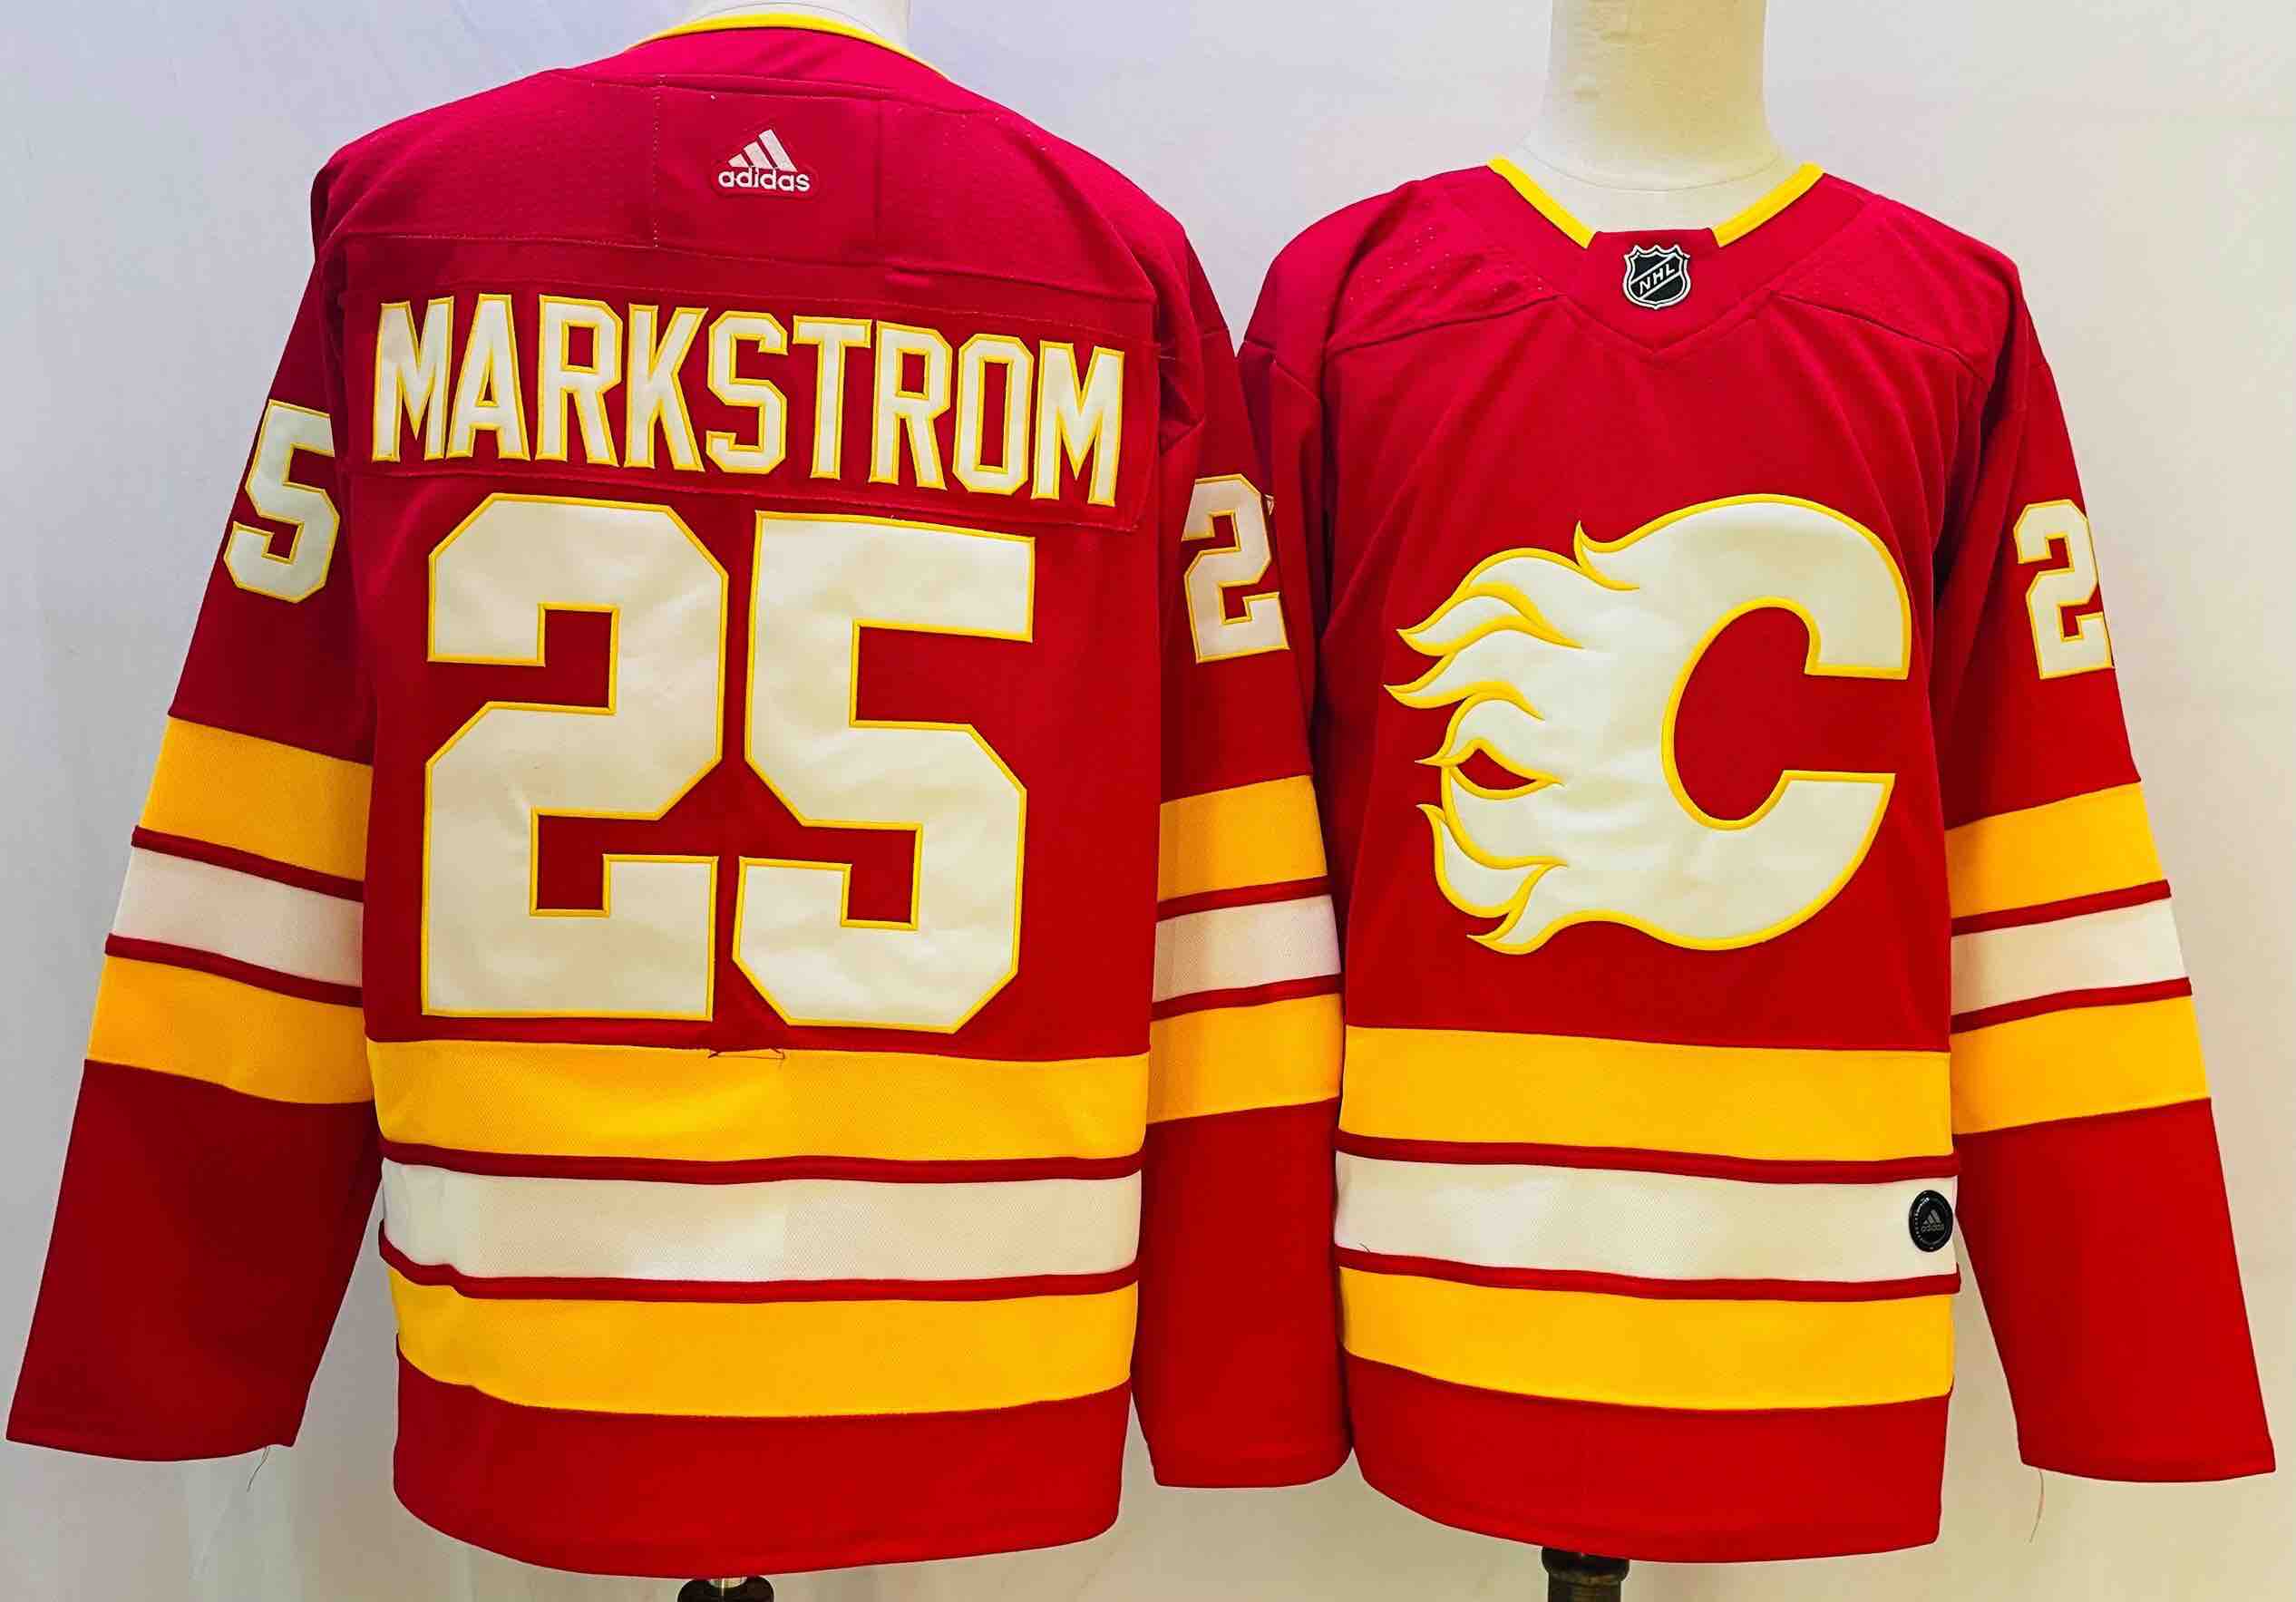 Adidas NHL Calgary Flames #25 Markstrom Red Jersey